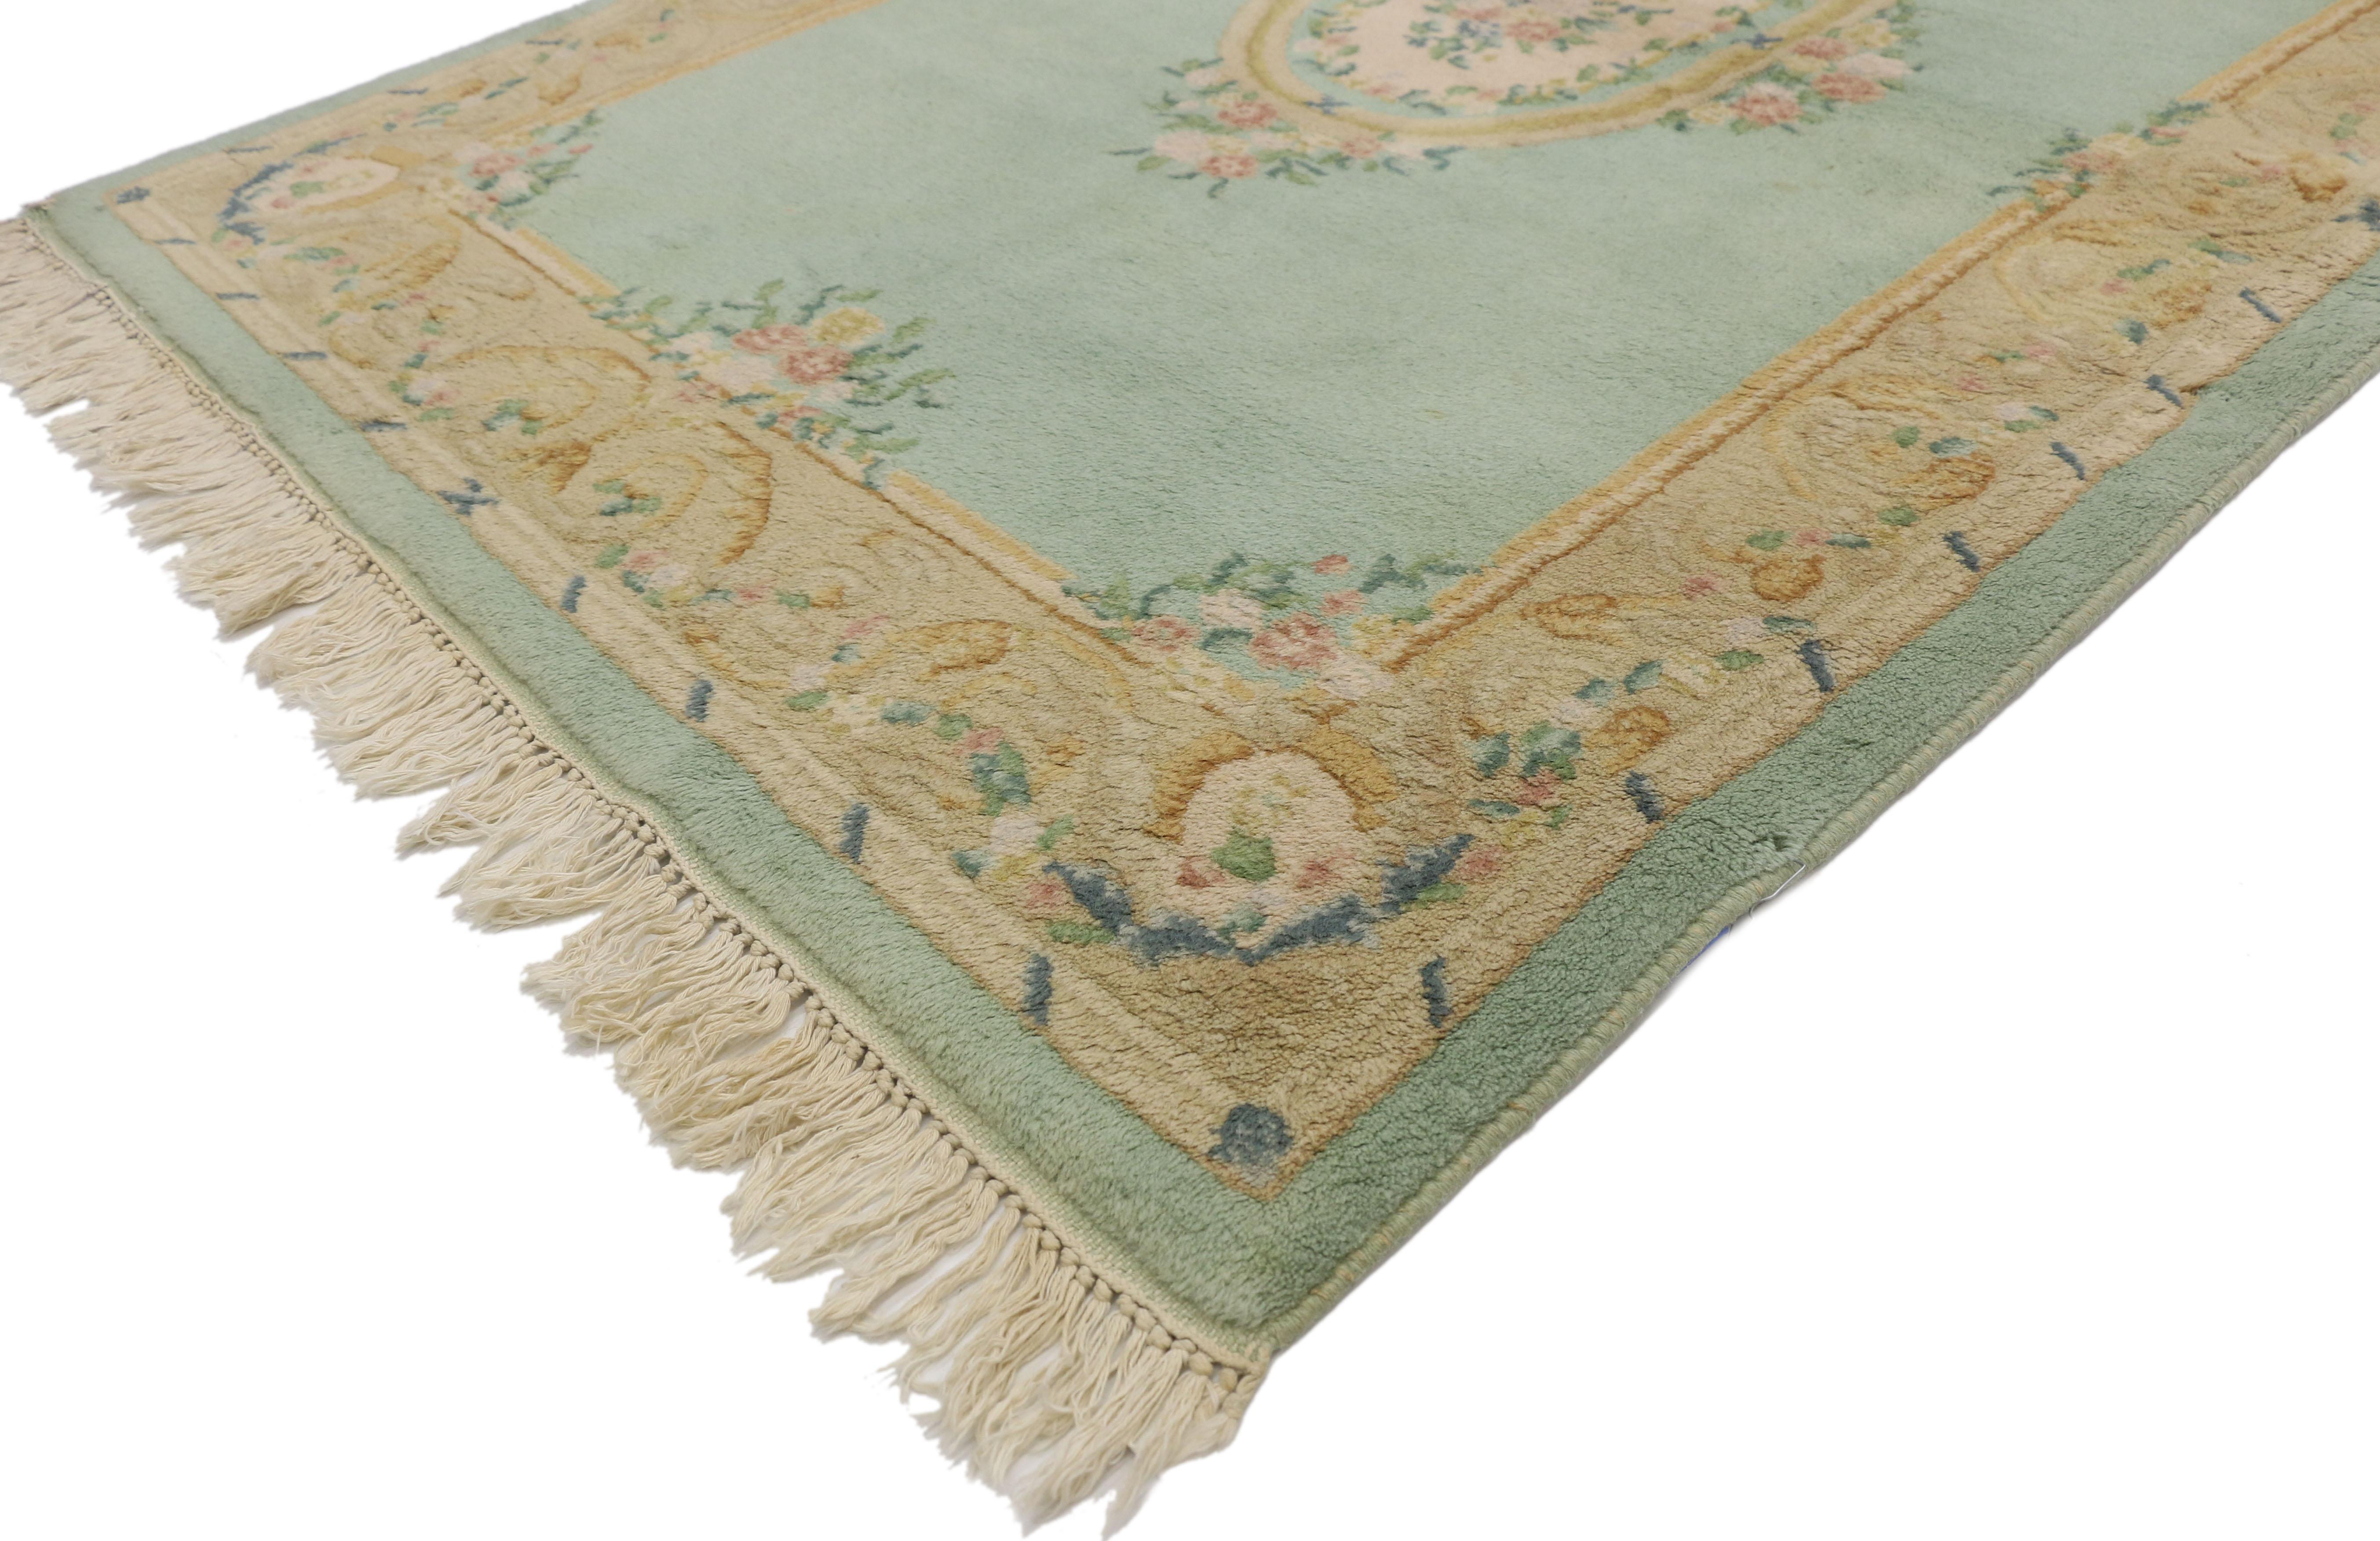 74741, vintage French Aubusson style rug with French Rococo Georgian style. This vintage French Aubusson style Indian rug features a creamy-beige center oval medallion filled with dense florals, roses, and leafy tendrils in an open abrashed field.